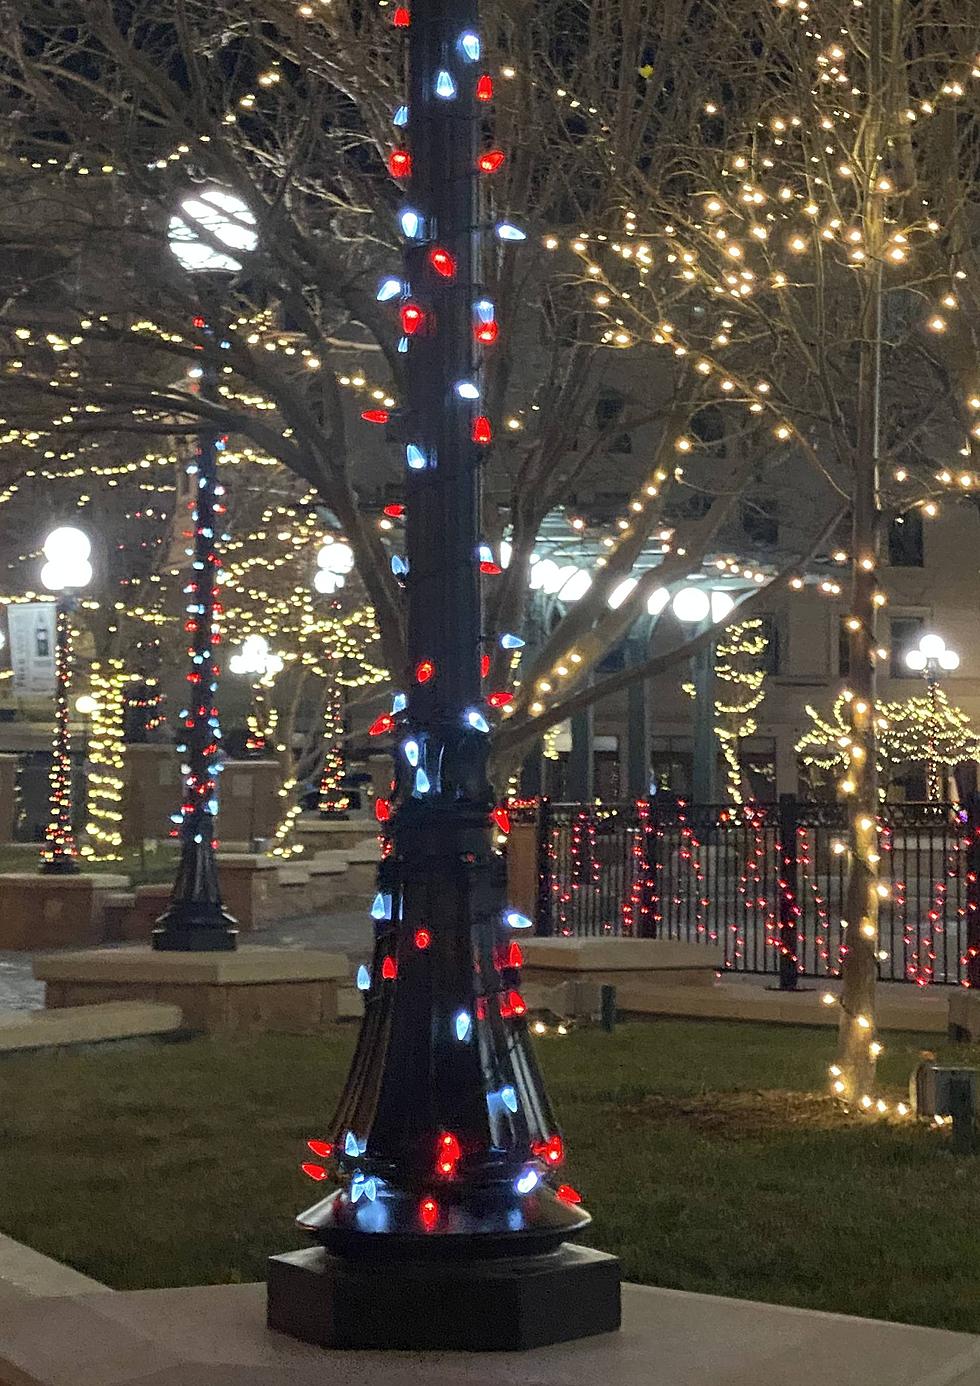 Look! Cheyenne’s Downtown Depot Plaza Is Getting In The Christmas Spirit!